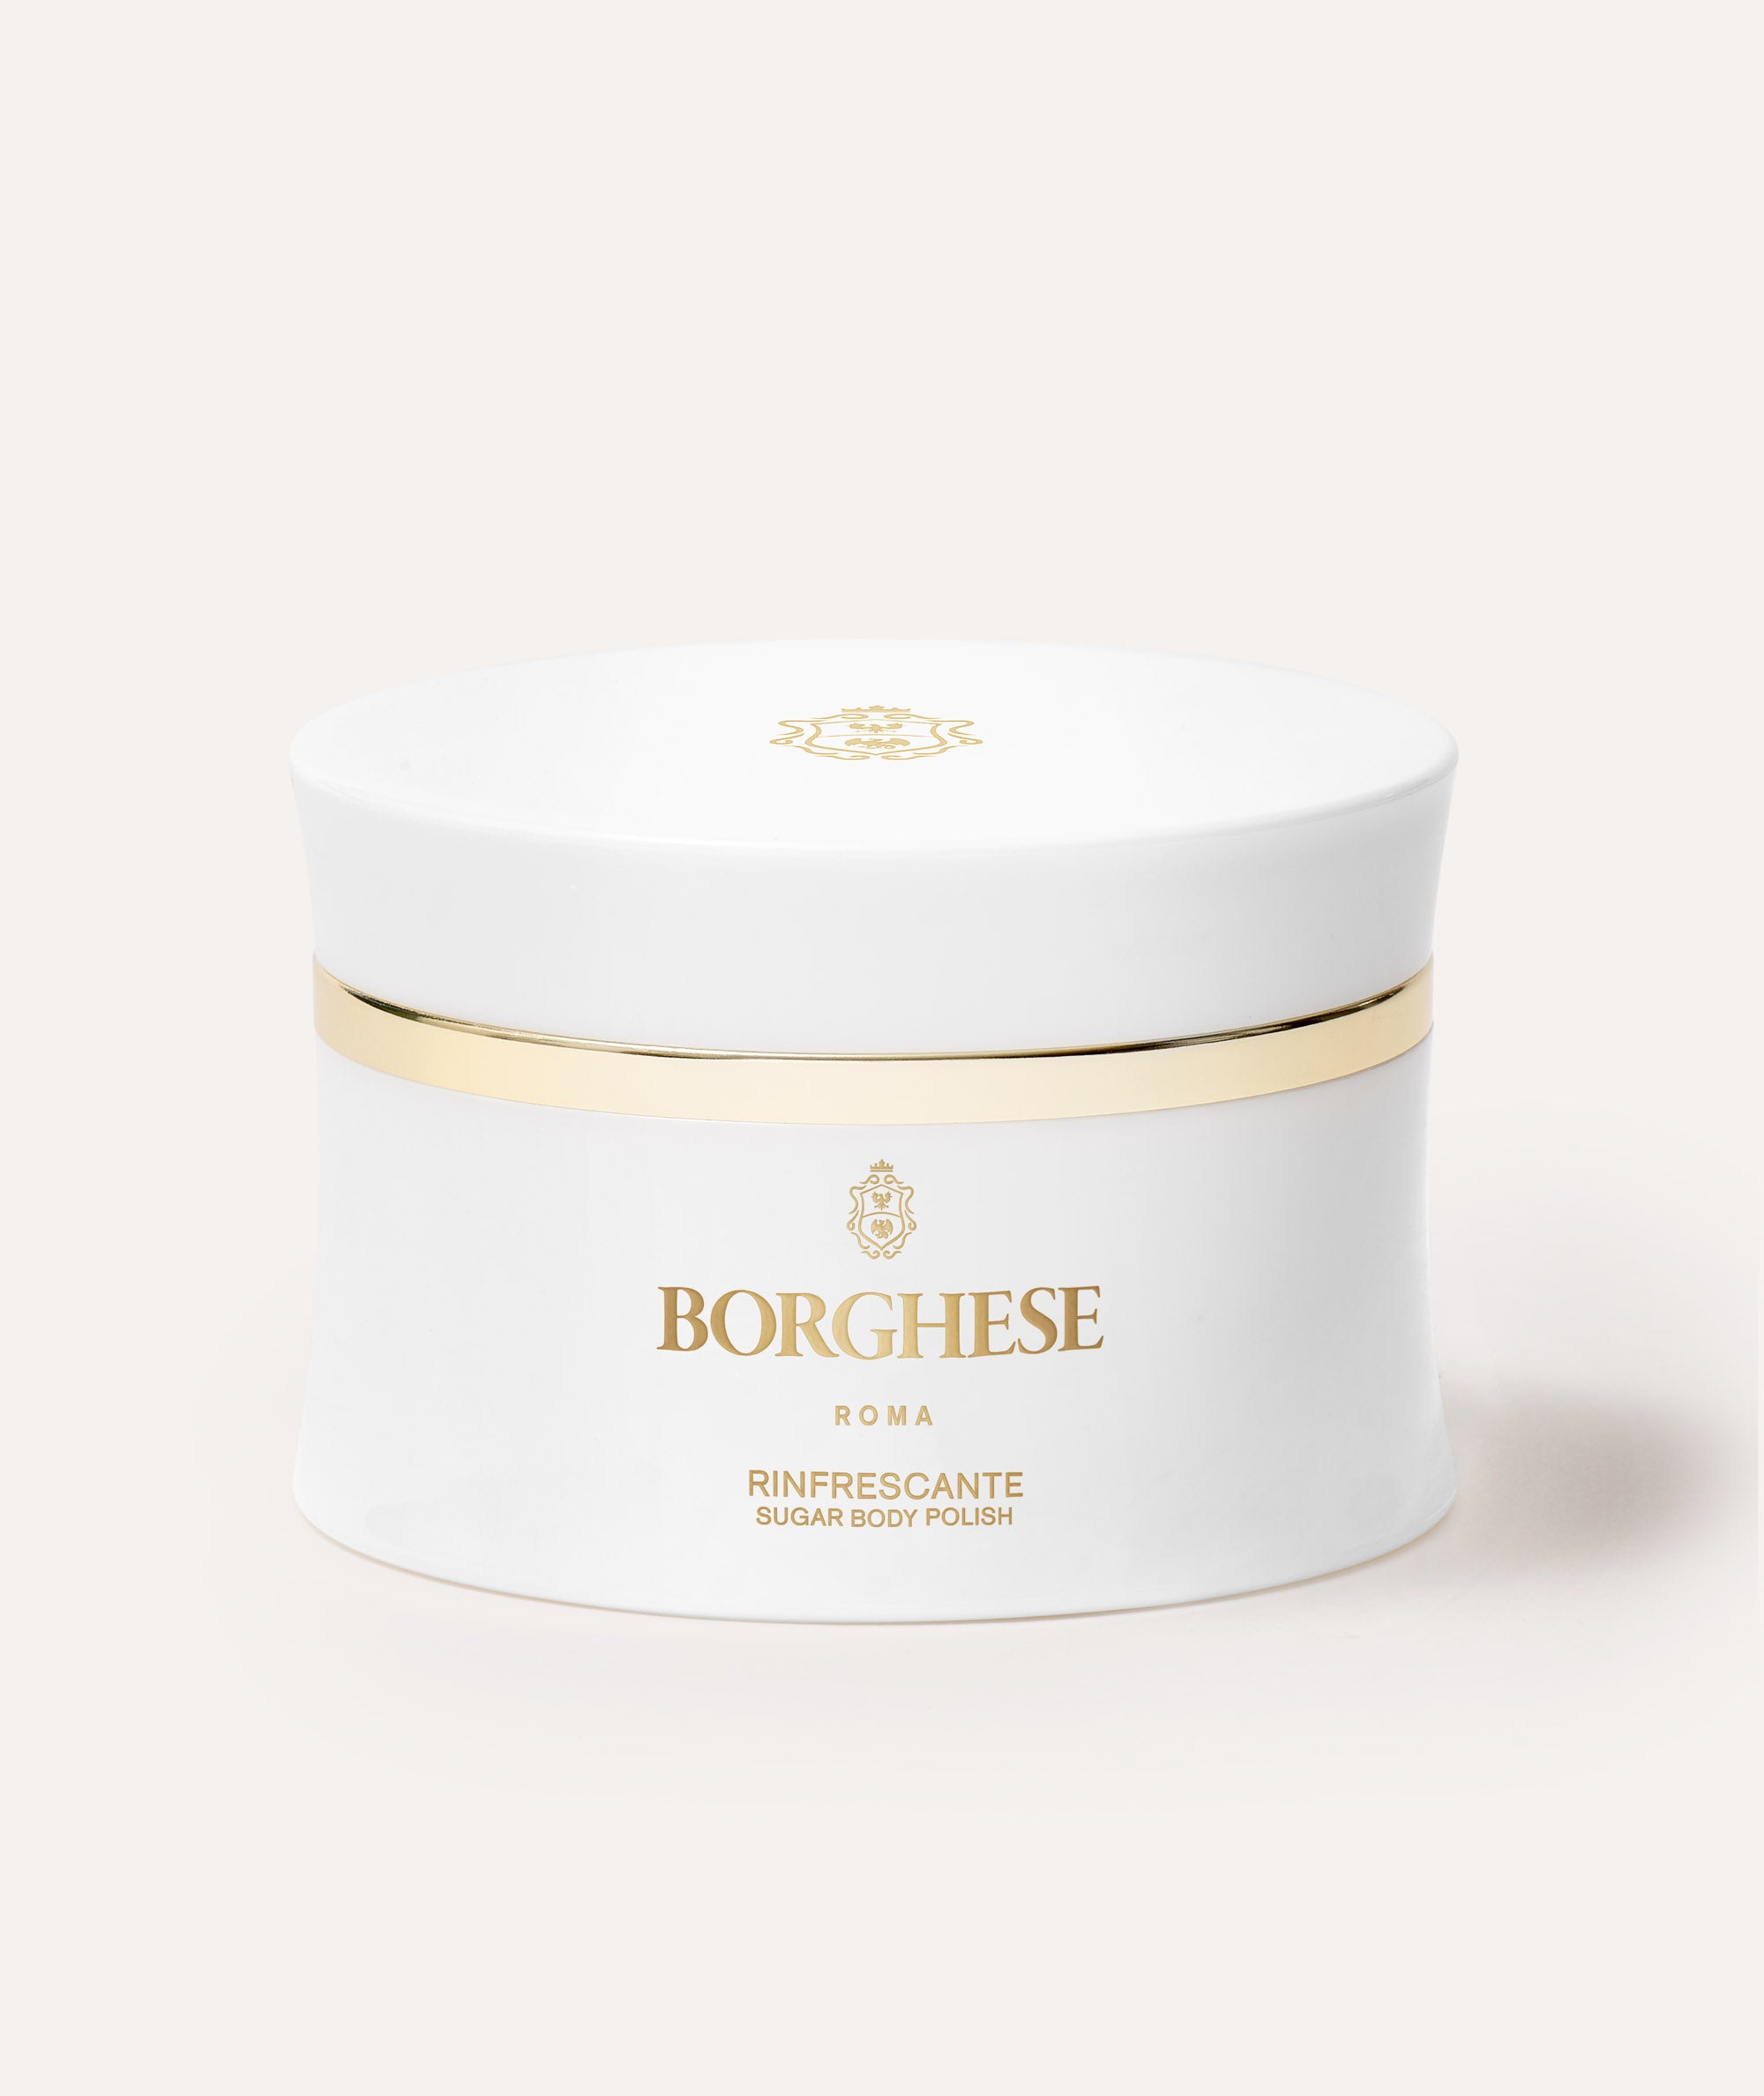 This is a picture of the Borghese Rinfrescante Sugar Body Scrub in a white jar